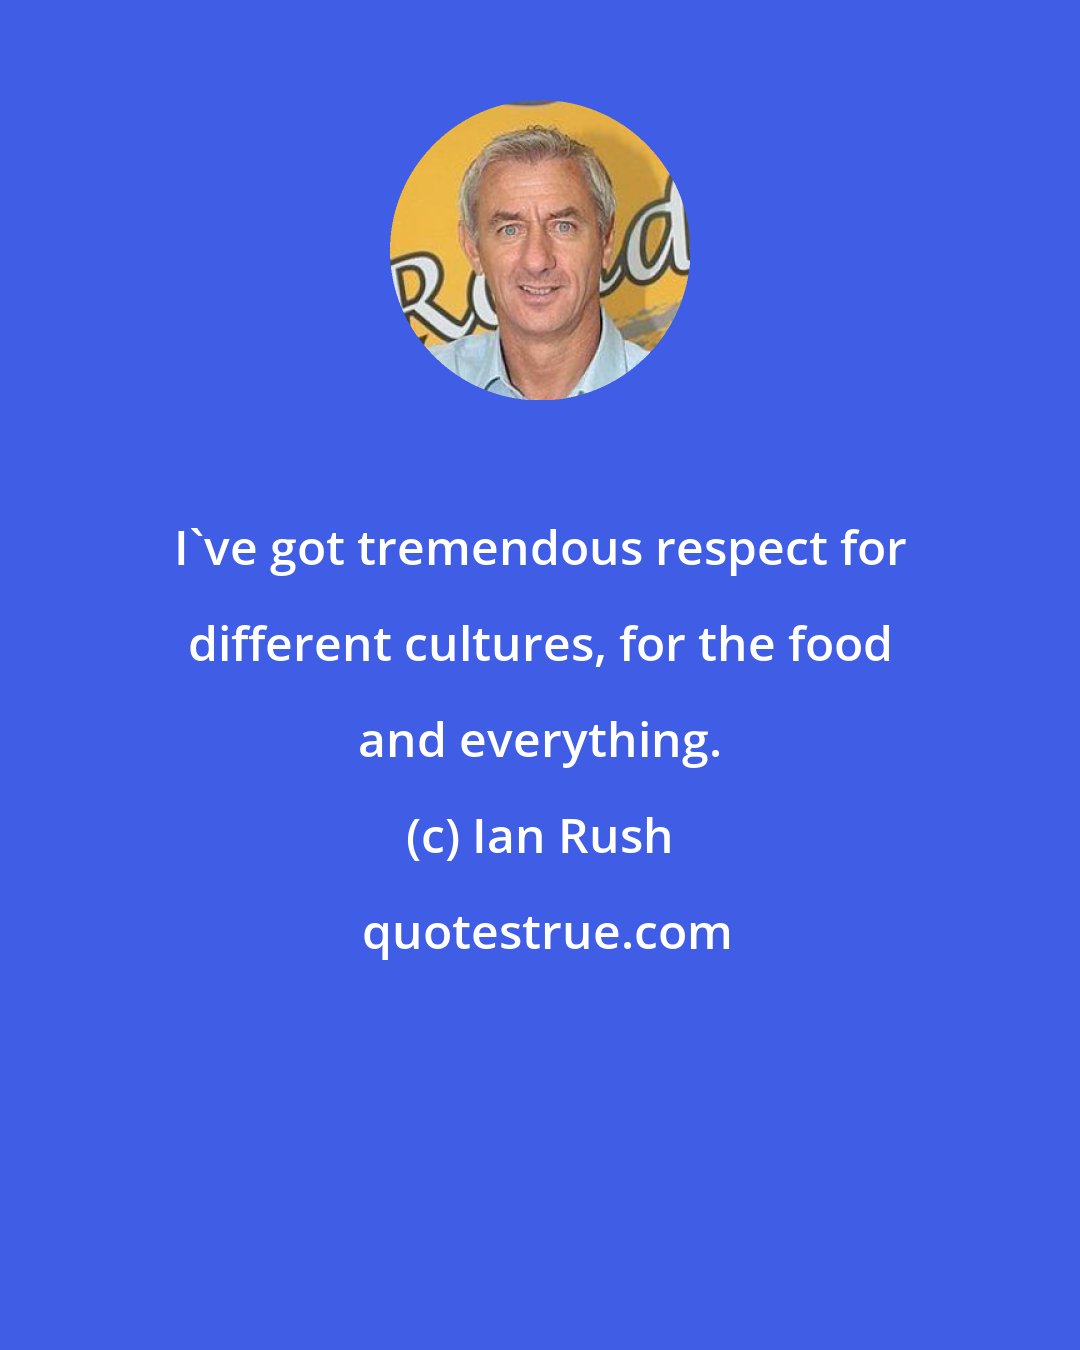 Ian Rush: I've got tremendous respect for different cultures, for the food and everything.